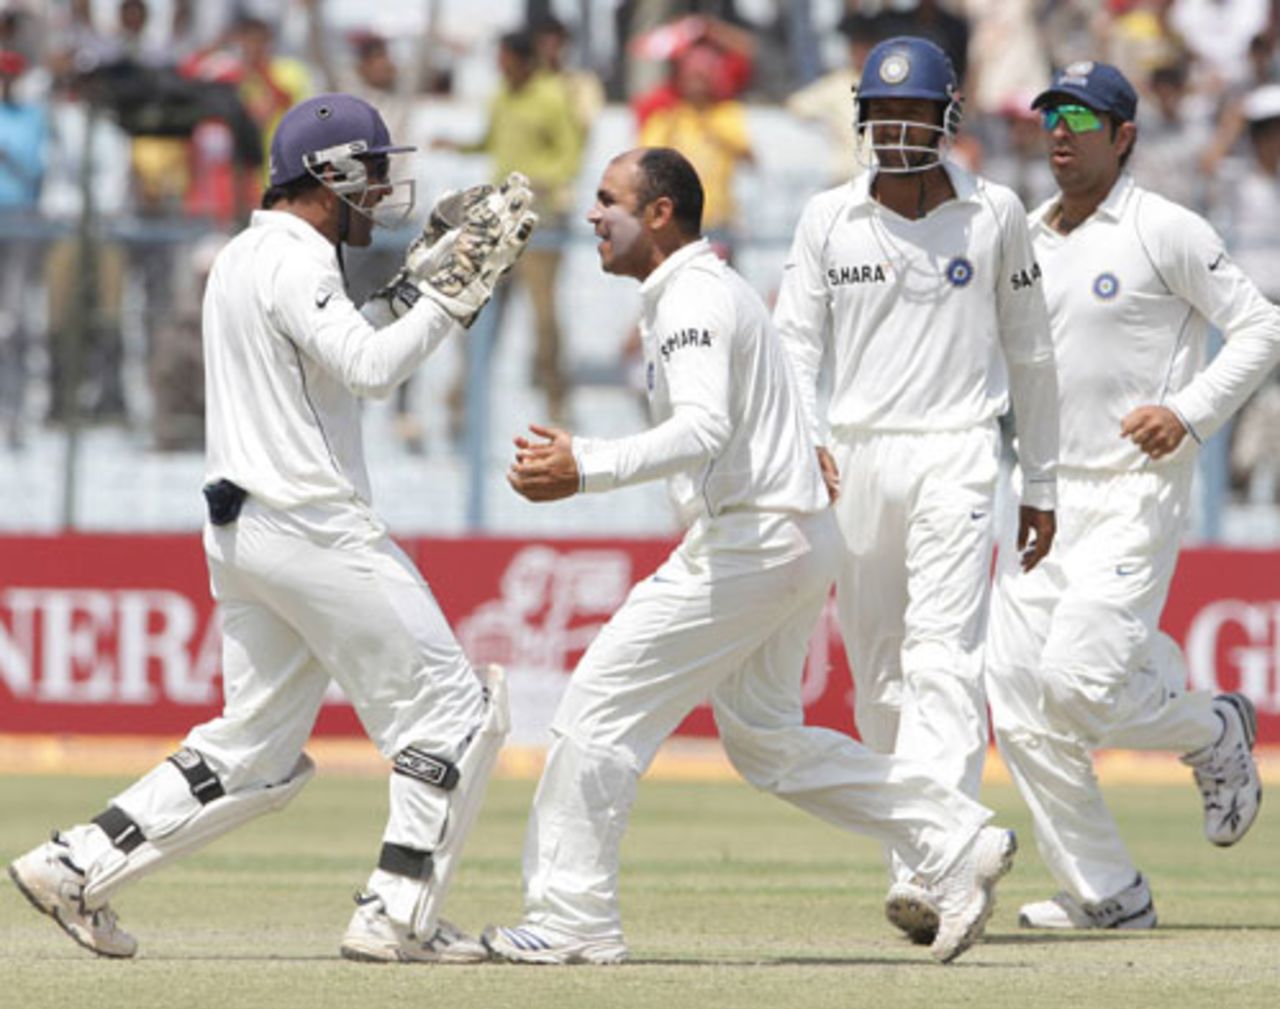 Virender Sehwag celebrates with Mahendra Singh Dhoni after dismissing Jacques Kallis with his first ball, India v South Africa, 3rd Test, Kanpur, 3rd day, April 13, 2008